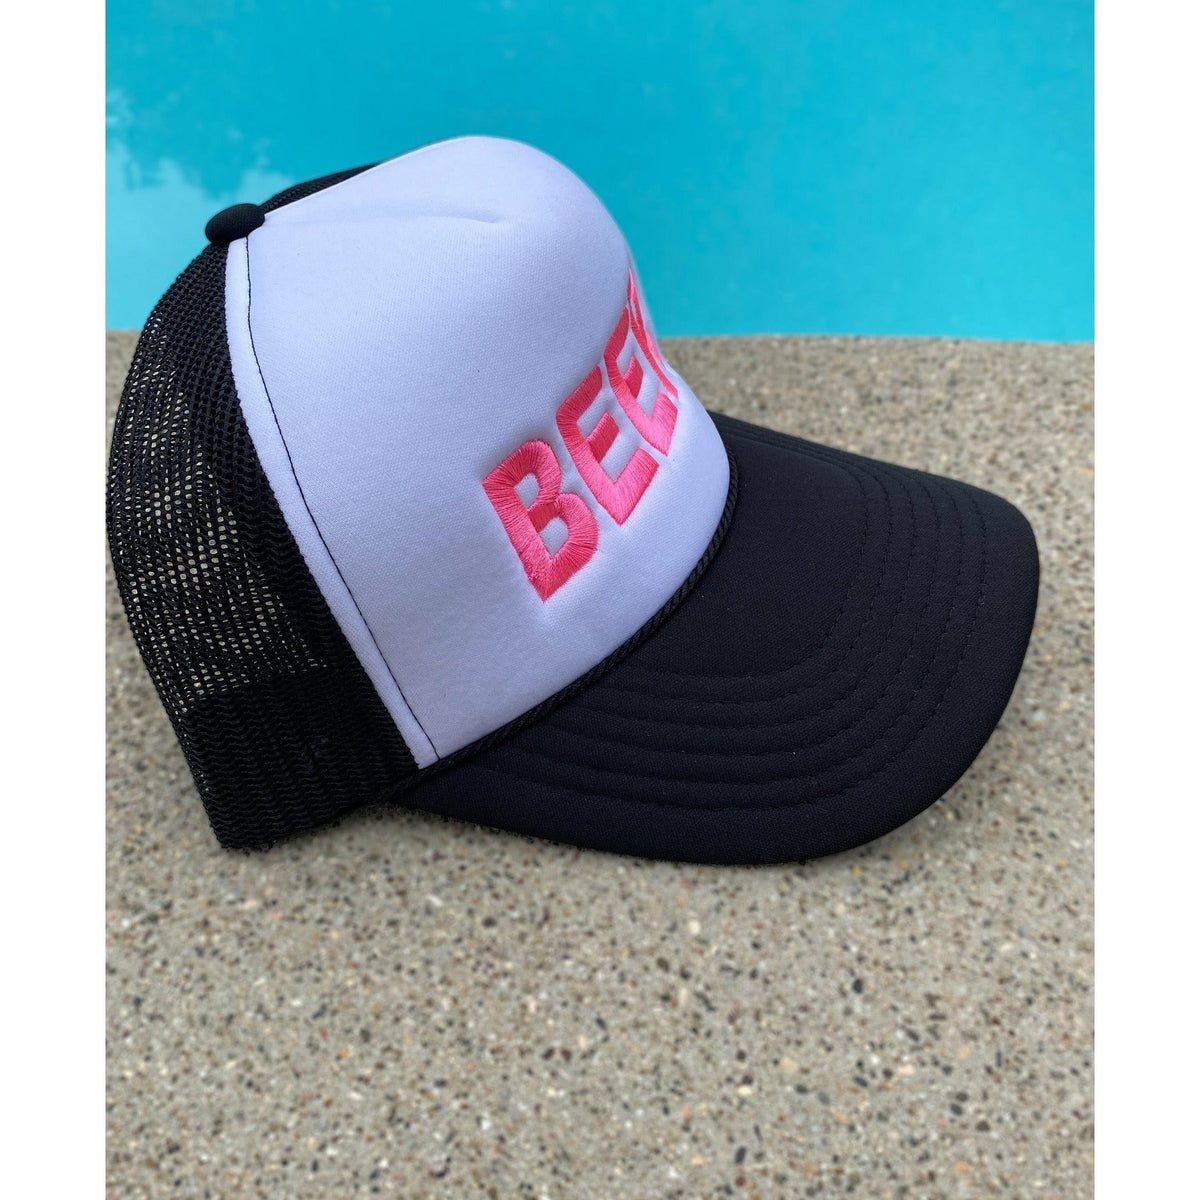 BEER Embroidered | Black and Pink White Trucker Hat by Haute Sheet Hats TheFringeCultureCollective